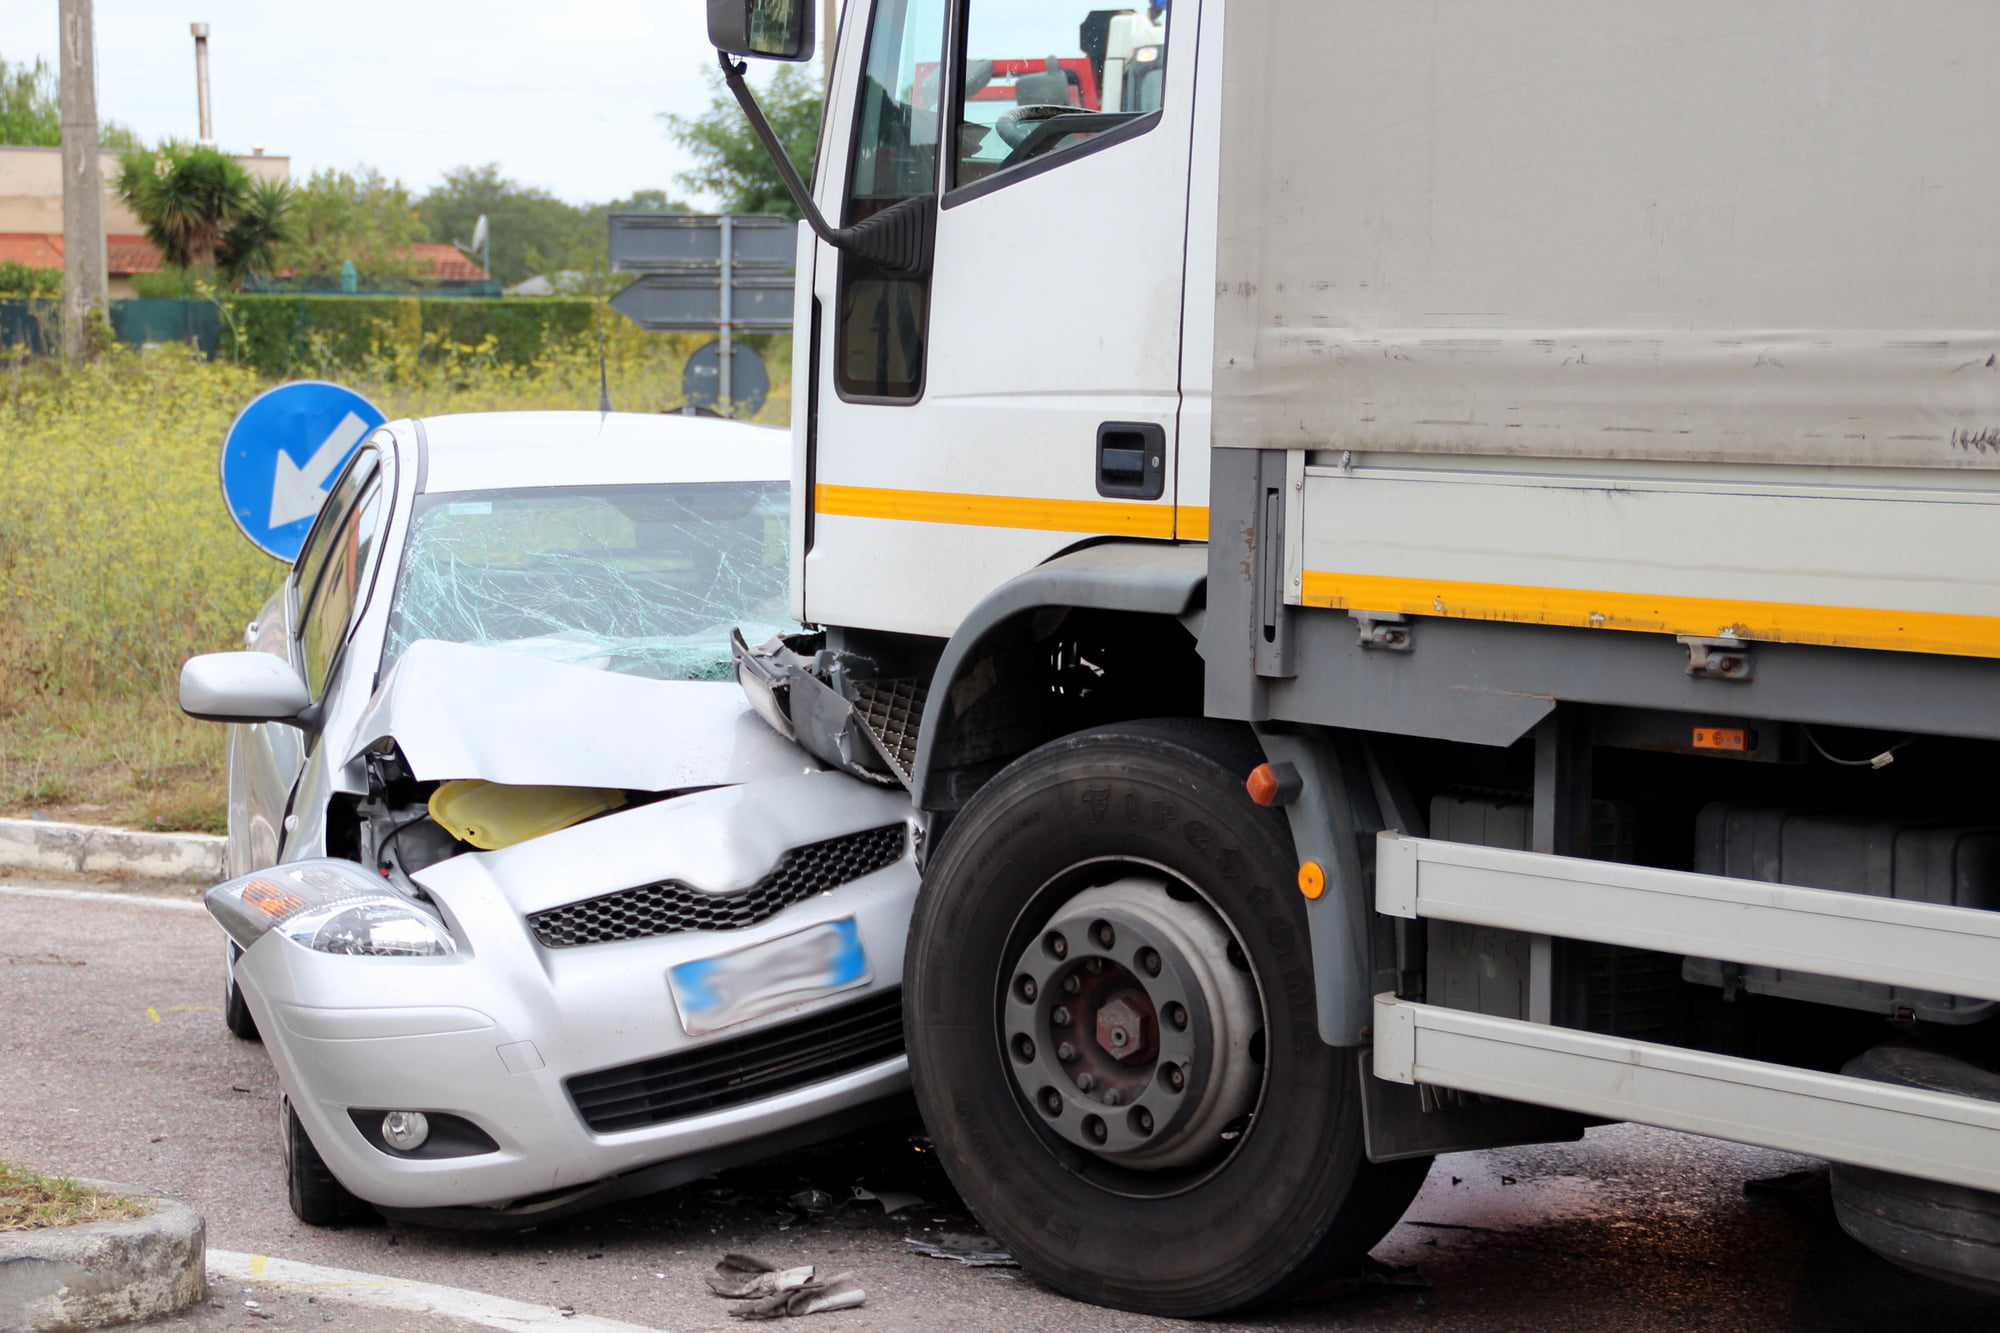 Have you just been involved in a truck accident and wondering how to file a claim? Learn how the truck accident claim process works here.